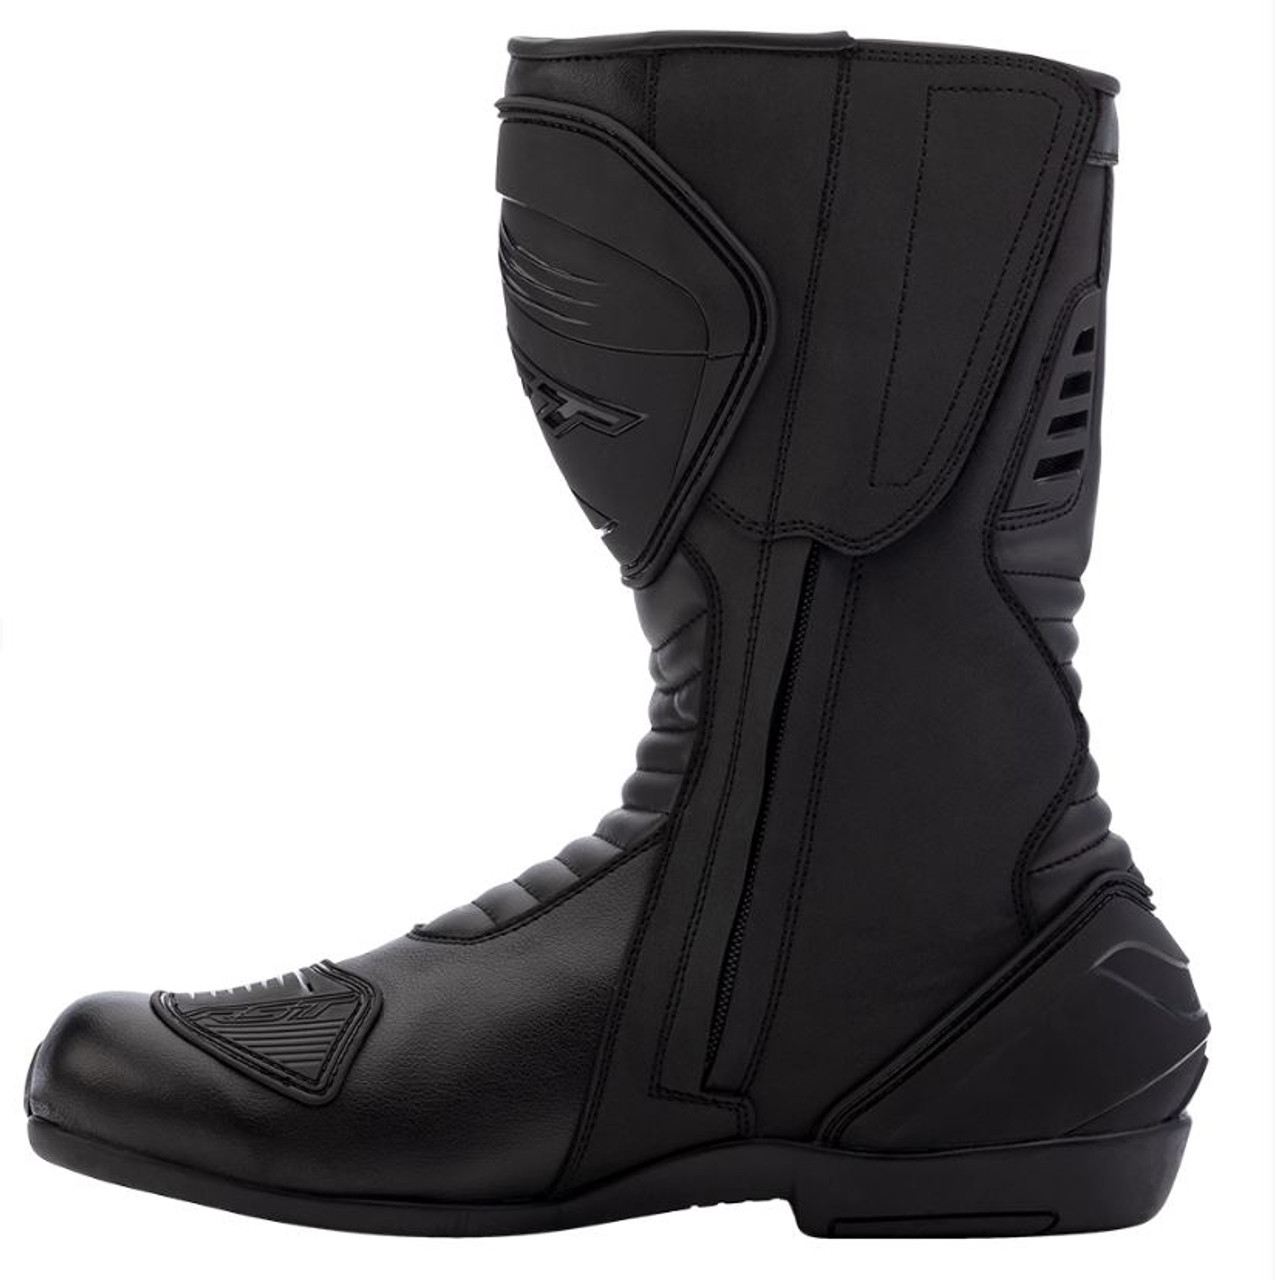 RST S1 Men's CE Waterproof Motorcycle Boots for Sale | Flitwick Motorcycles